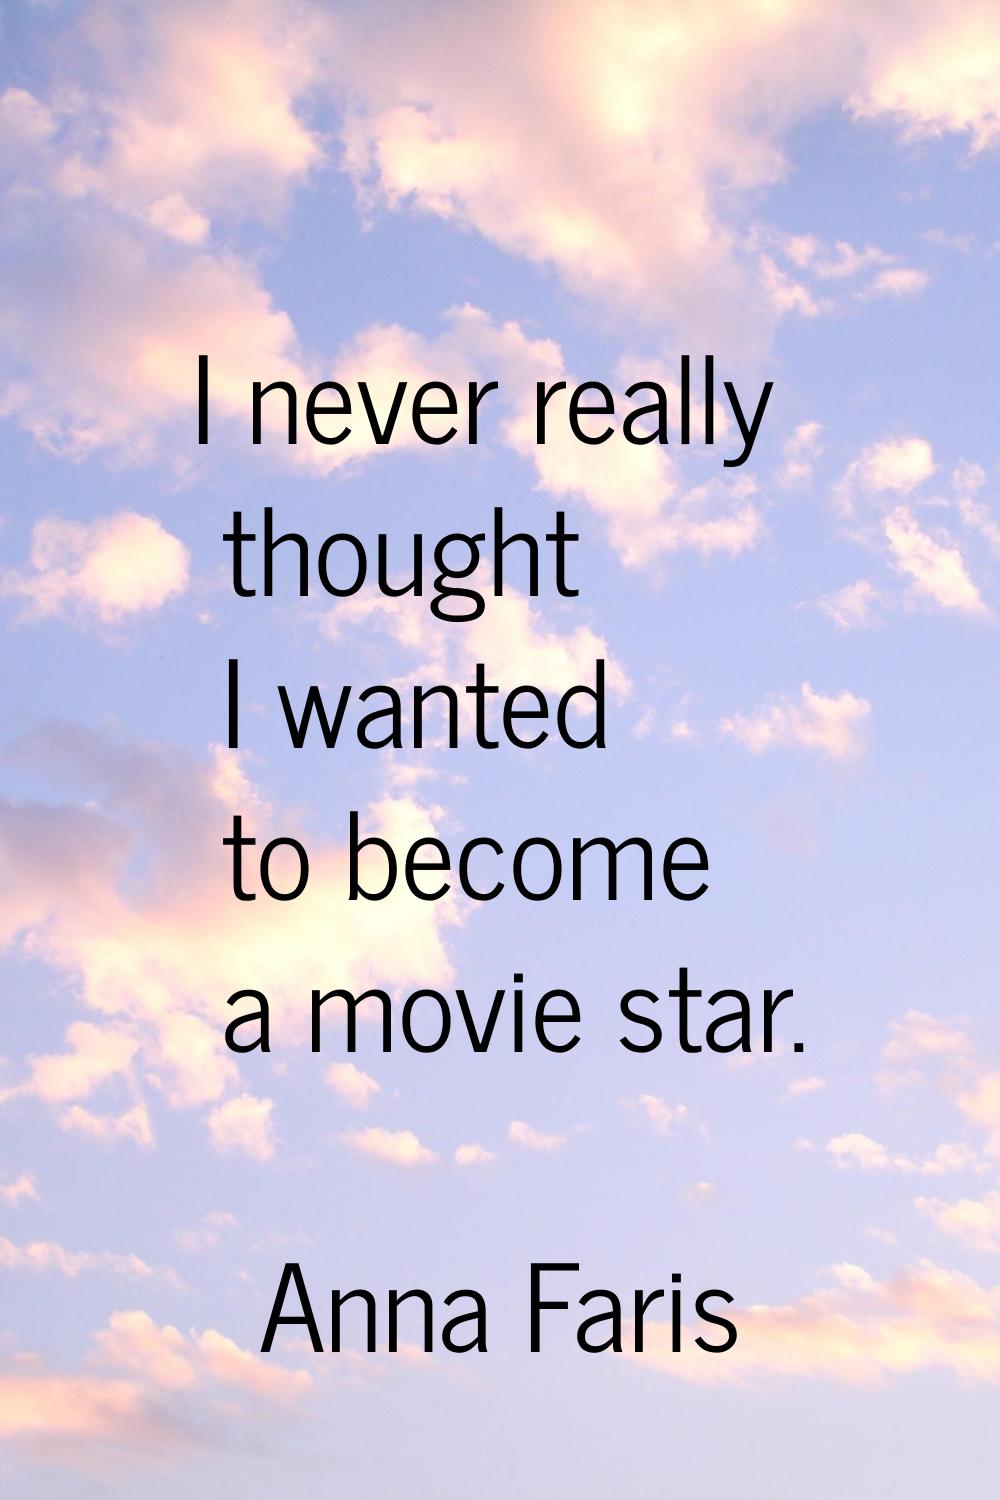 I never really thought I wanted to become a movie star.